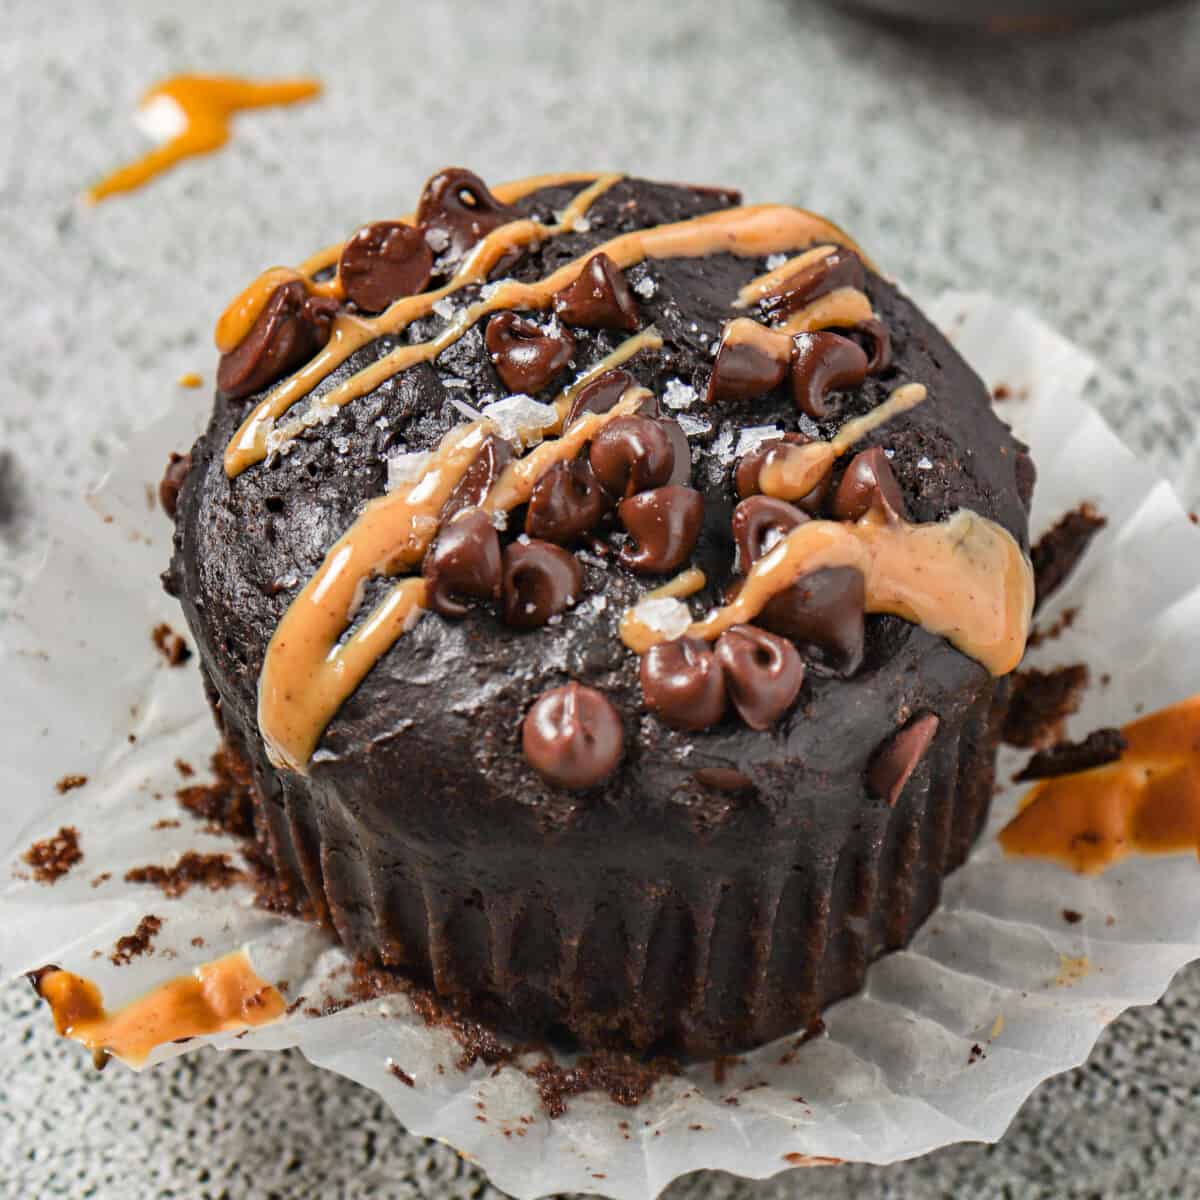 Chocolate muffins with chocolate chips, peanut butter and sea salt on top.